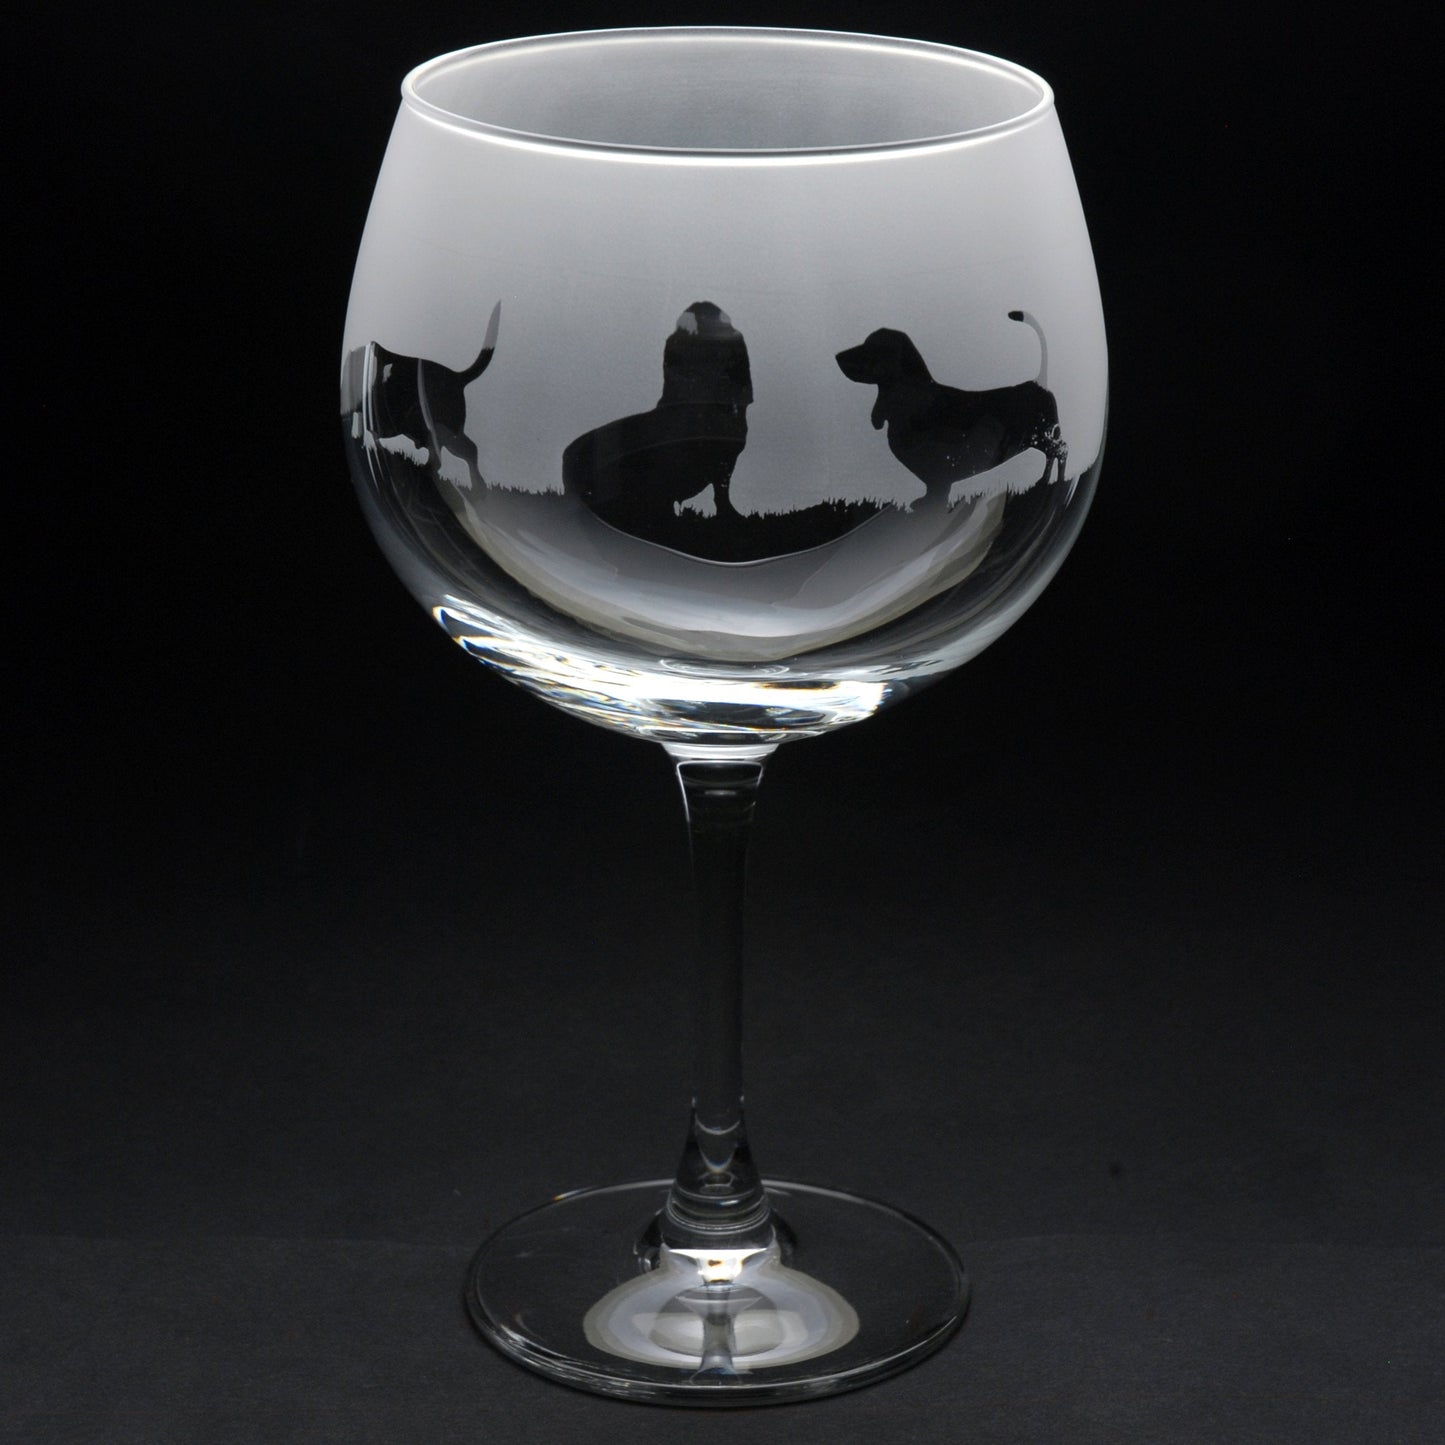 Basset Hound Dog Gin Cocktail Glass - Hand Etched/Engraved Gift